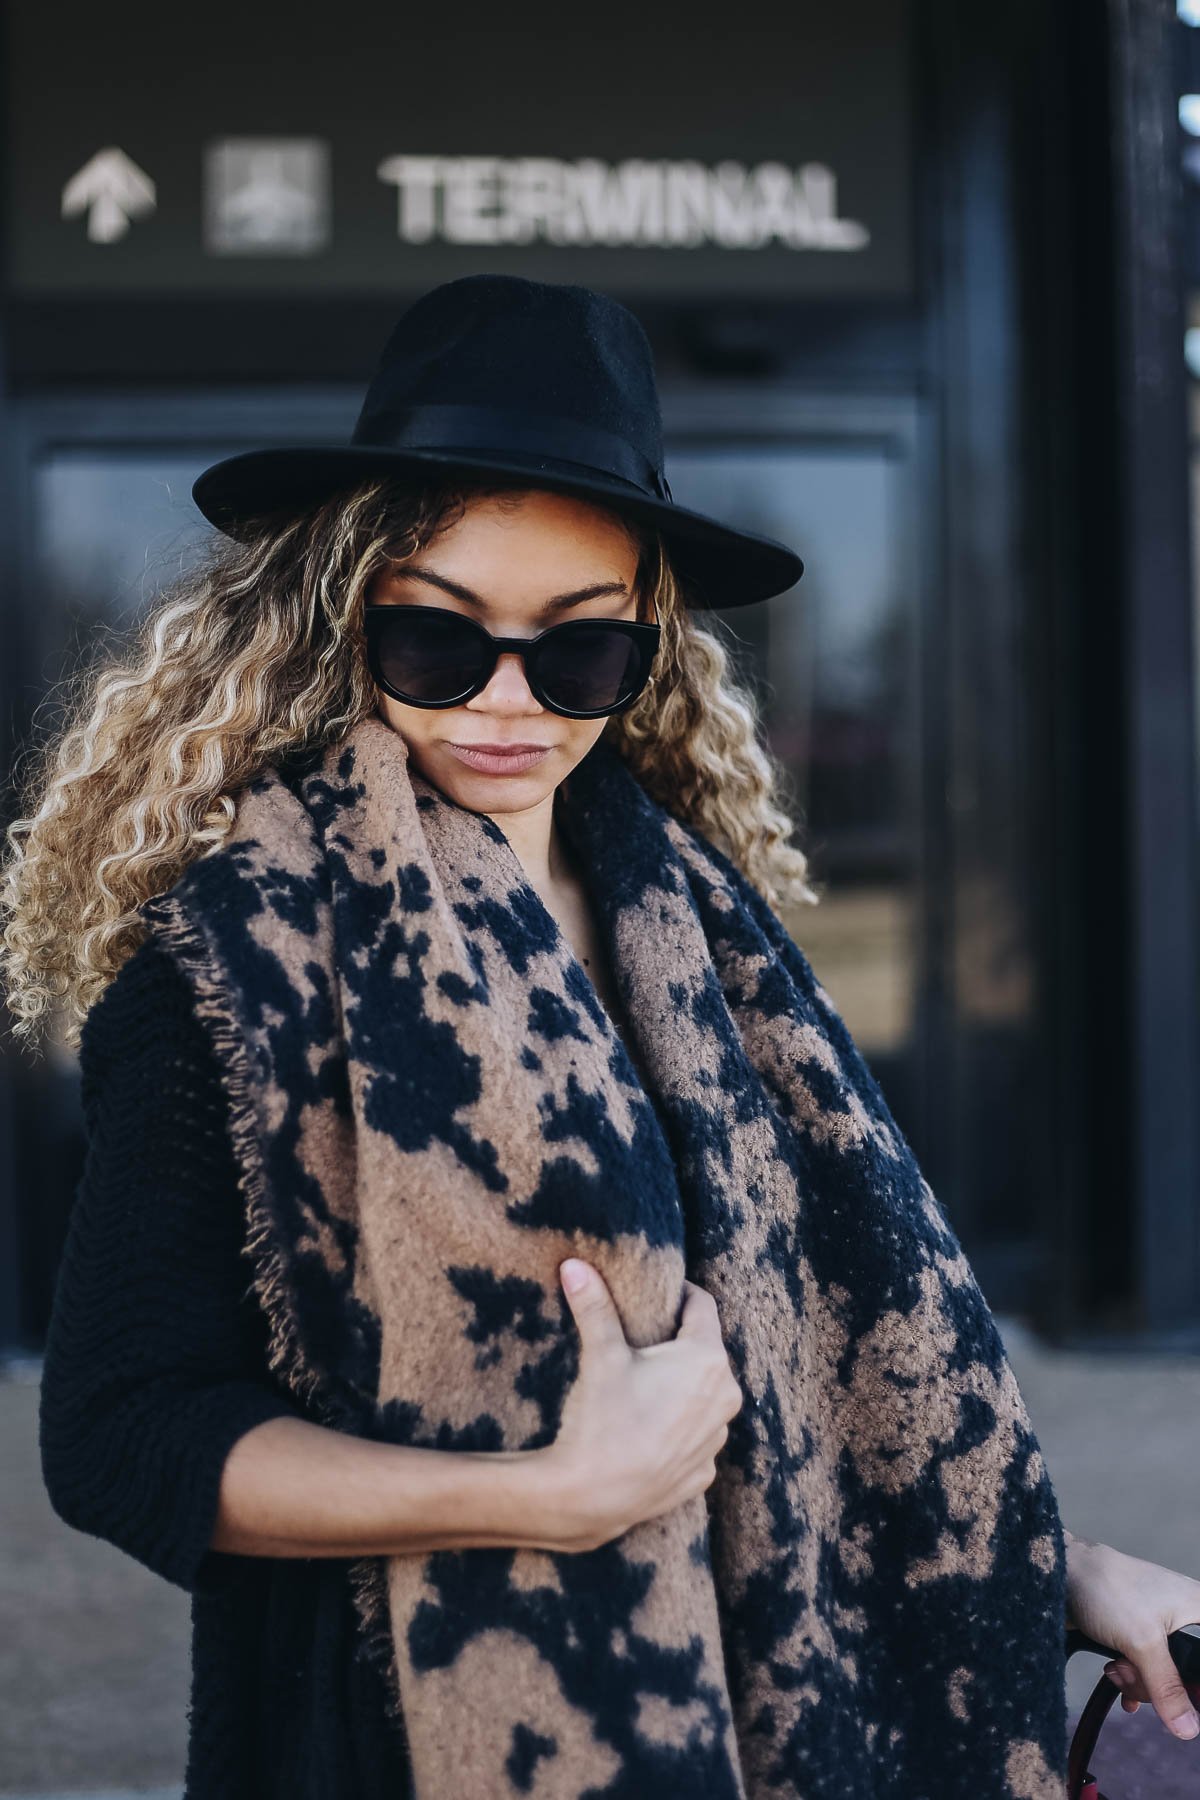 Are you a classy traveler that wants to look chic at the airport? Check out these travel outfits and accessories for your stylish traveling outfits!